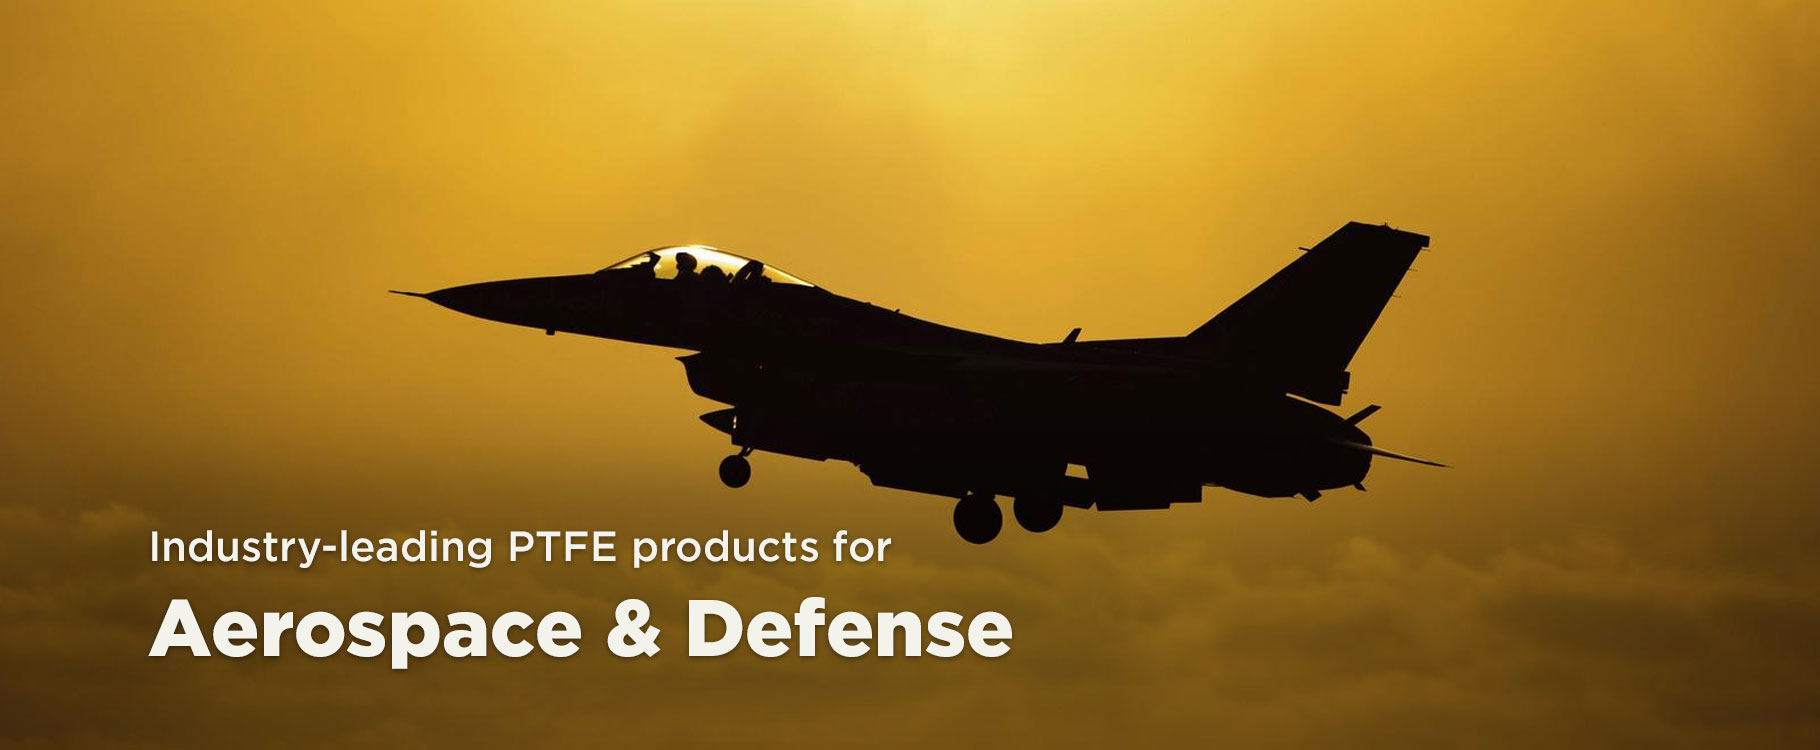 Industry-leading PTFE products for Aerospace and Defense